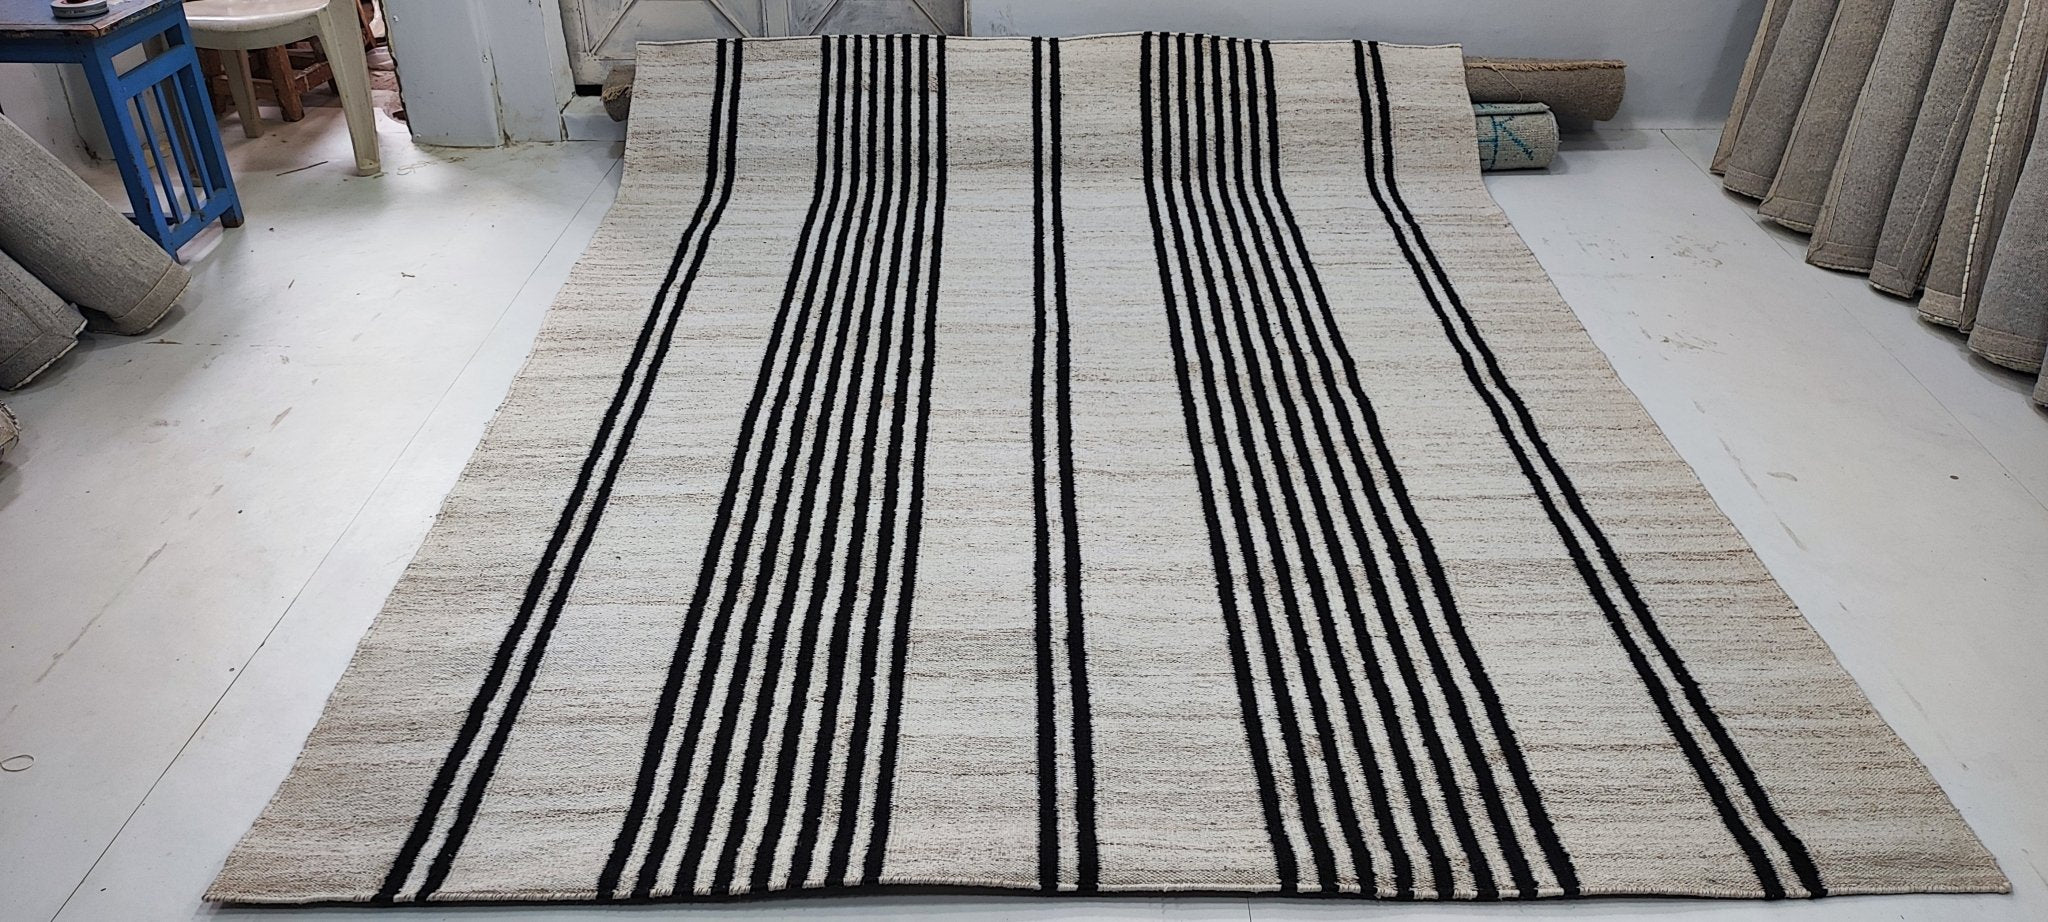 Knights of Nemesis 7.6x9.6 Handwoven Beige & Black Stripe Durrie | Banana Manor Rug Factory Outlet